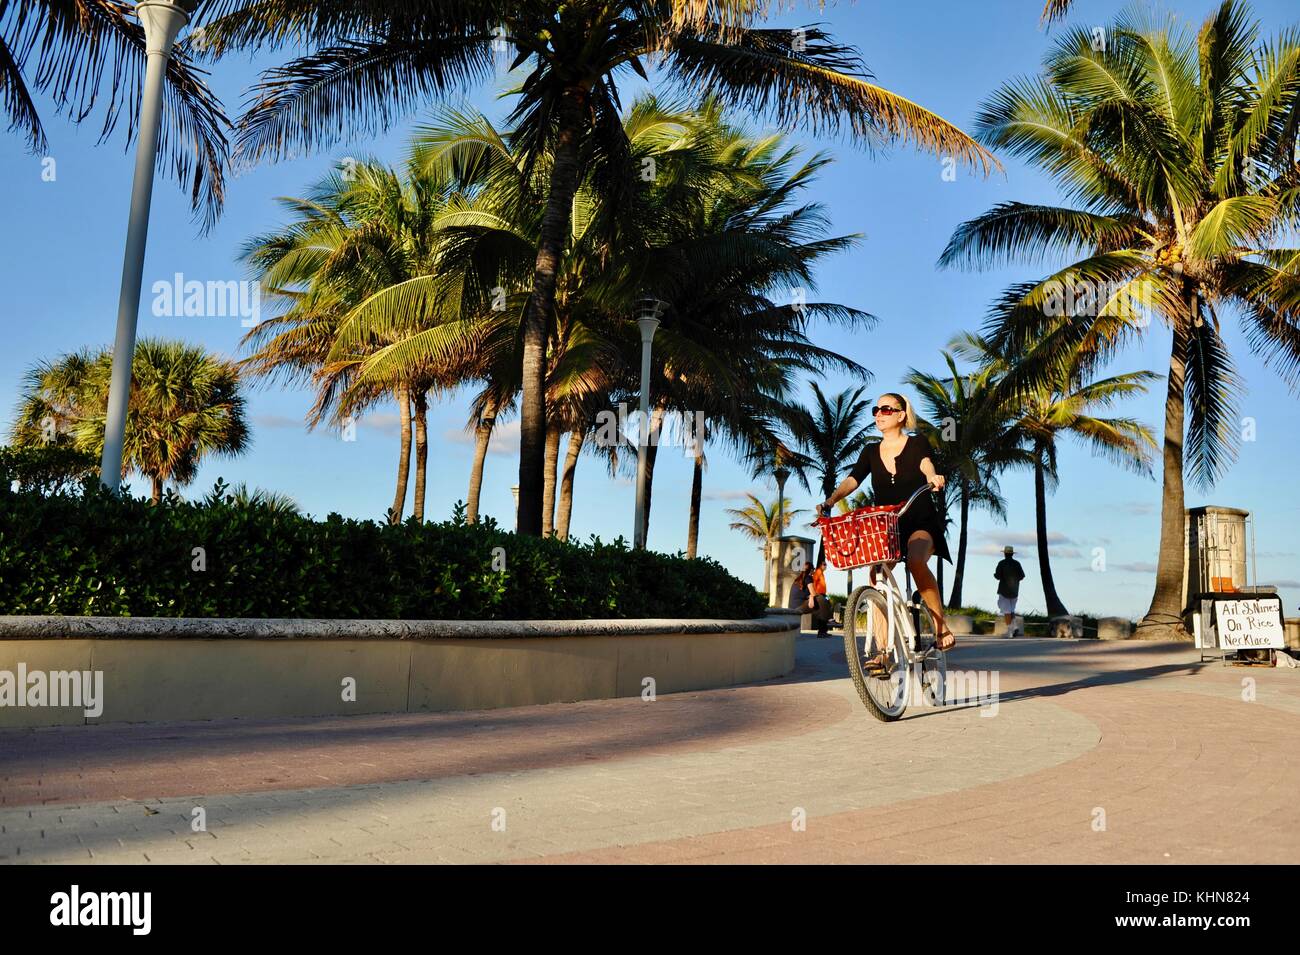 Woman in dress bicycling along Serpentine Pathway in South Beach, Miami, Florida, USA. Stock Photo